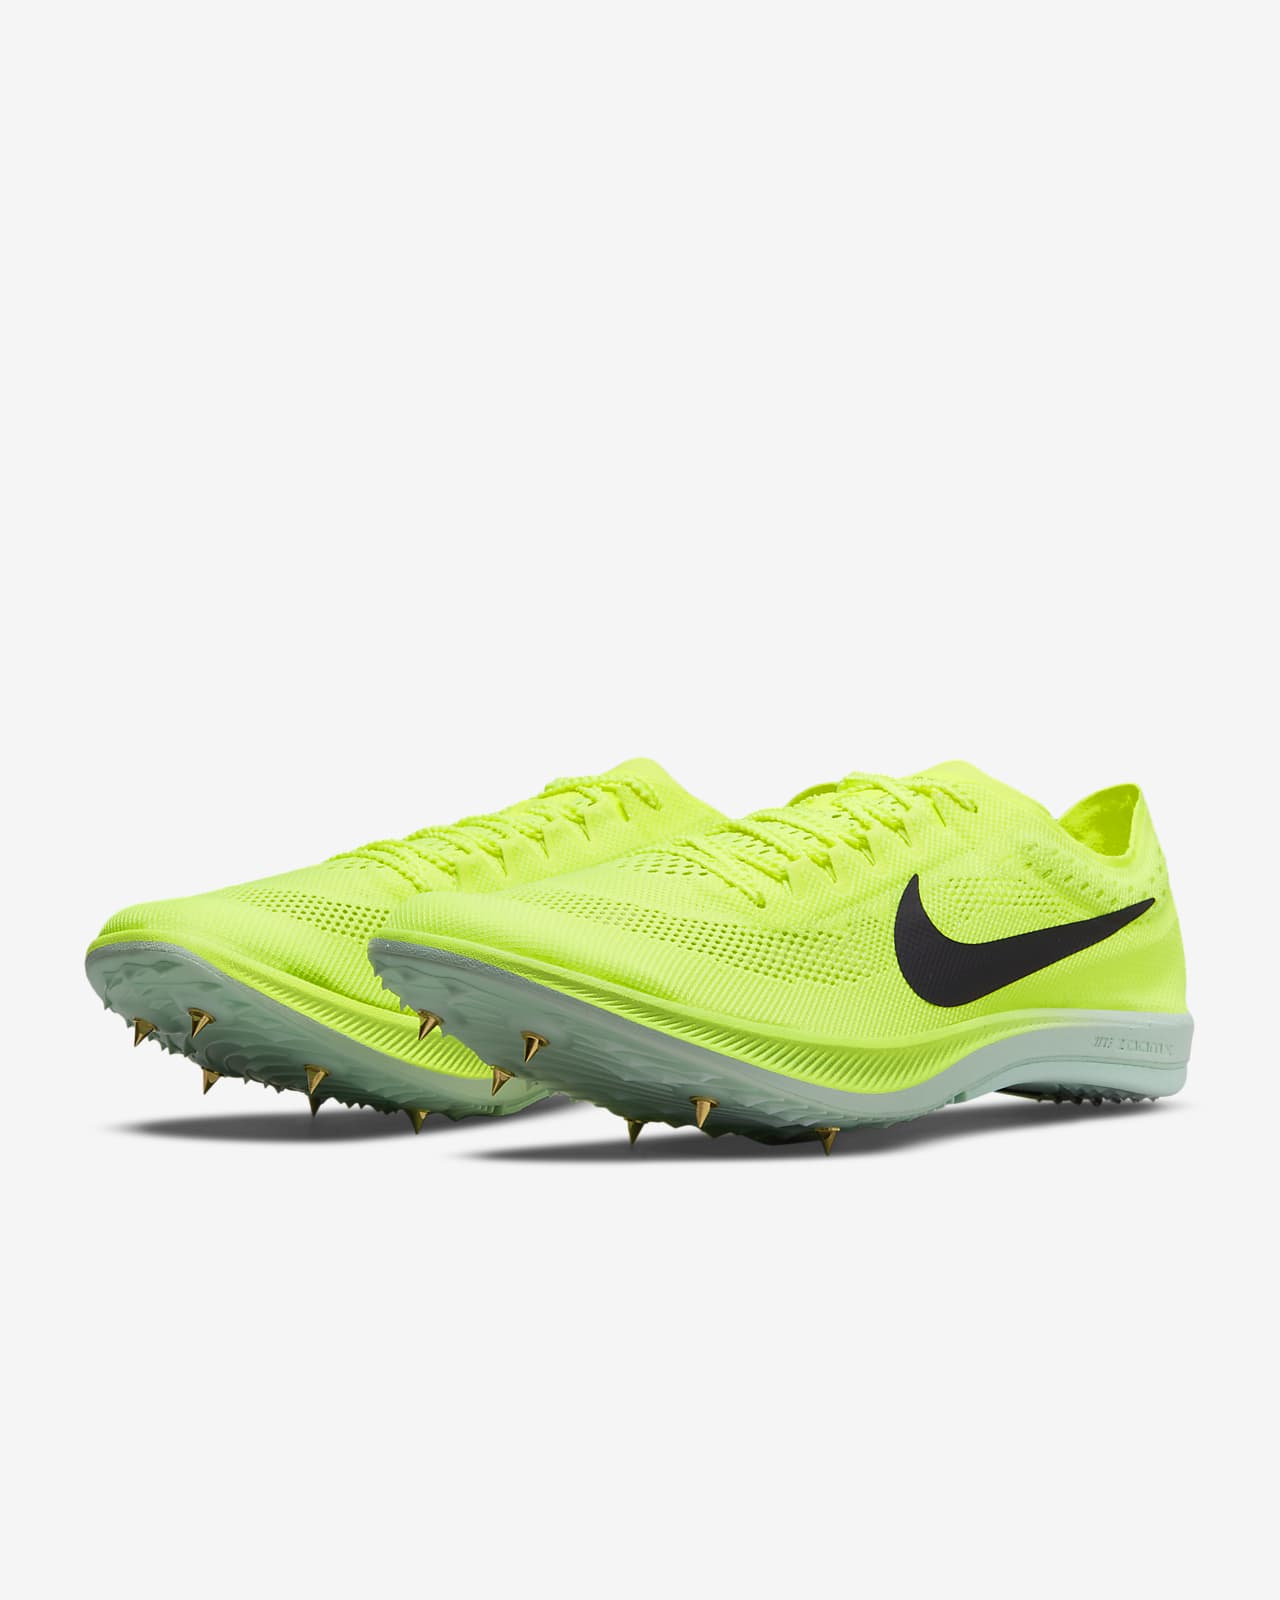 Nike ZoomX Dragonfly Athletics Distance Spikes